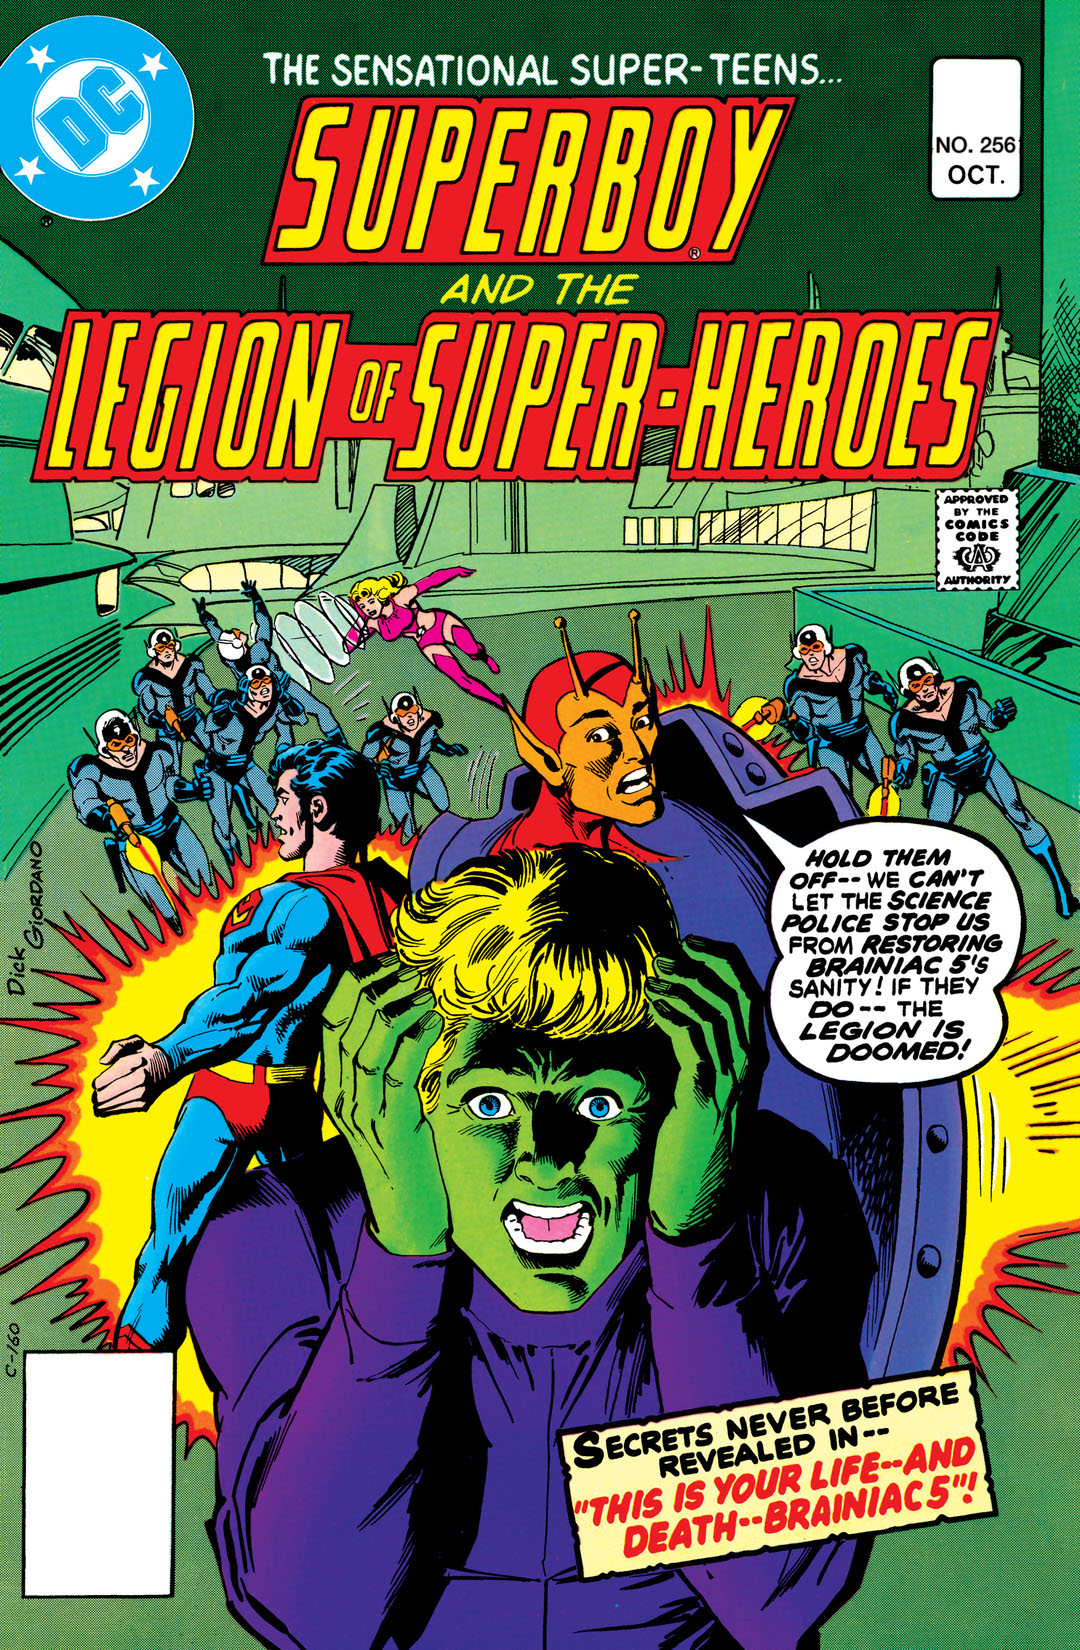 Superboy and the Legion of Super-Heroes (1977-) #256 preview images